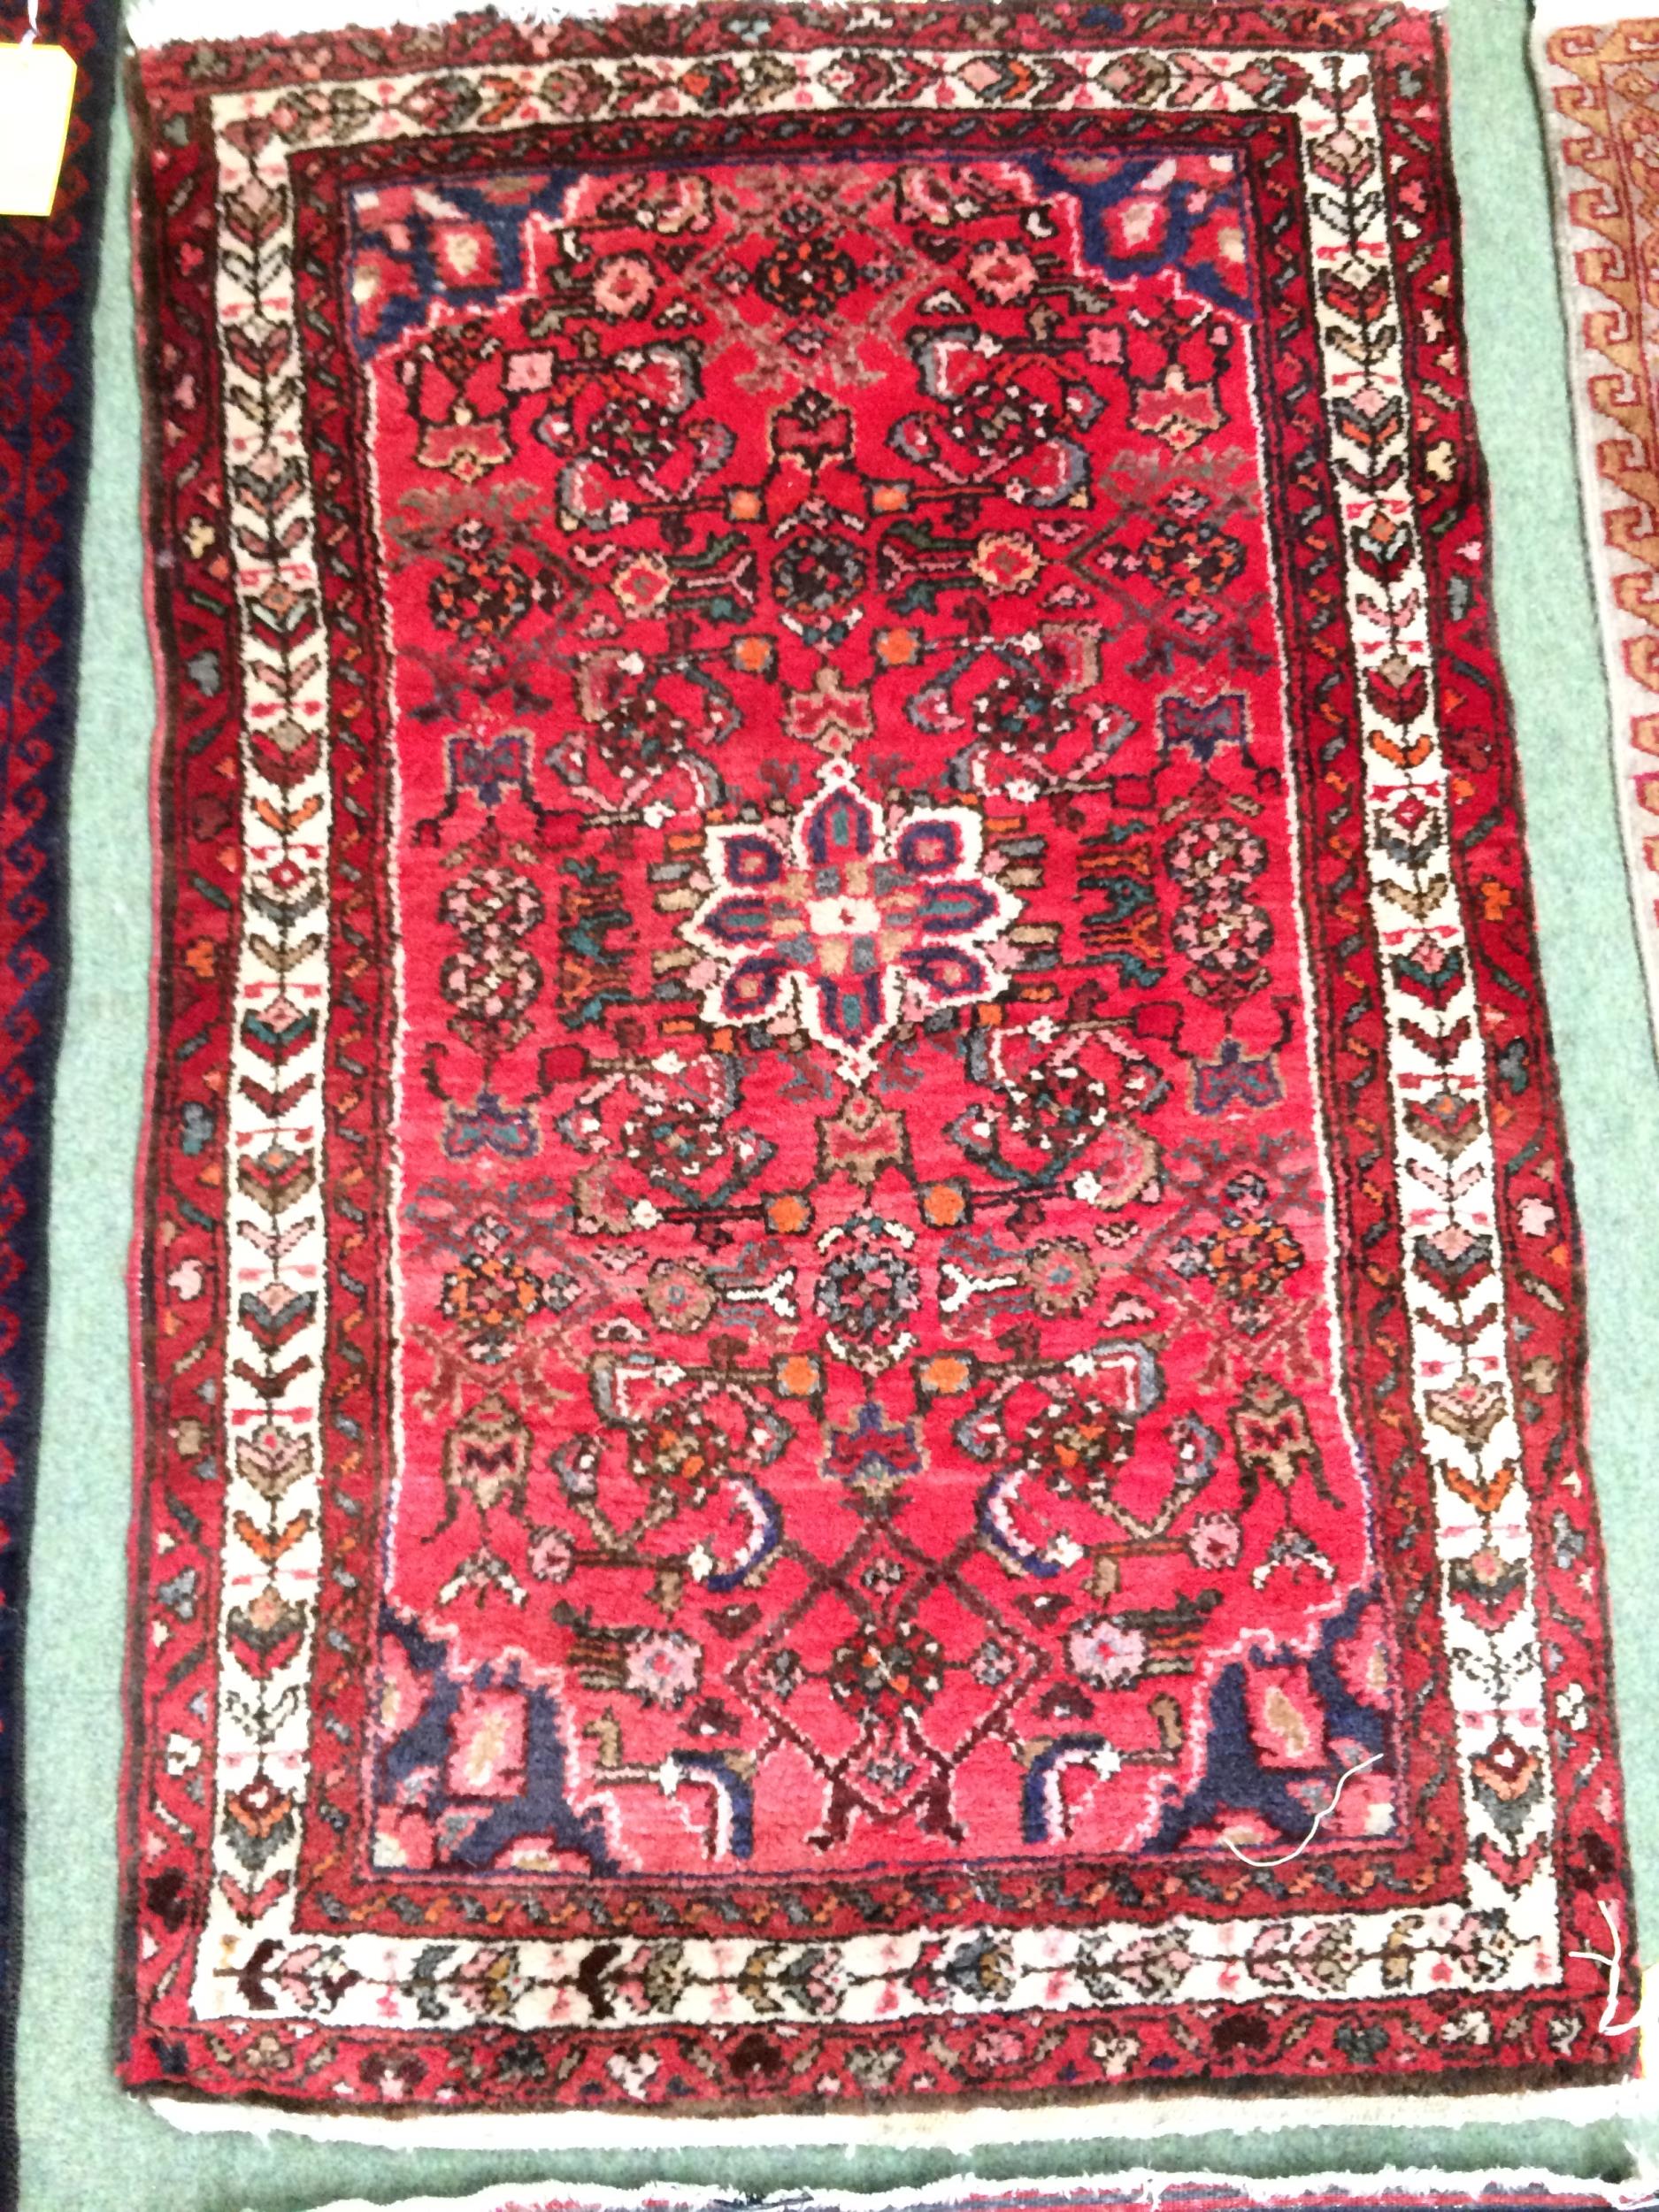 4 rugs, 3 red ground rugs with all over geometric stylized designs, and a blue and red ground Tree - Image 5 of 9